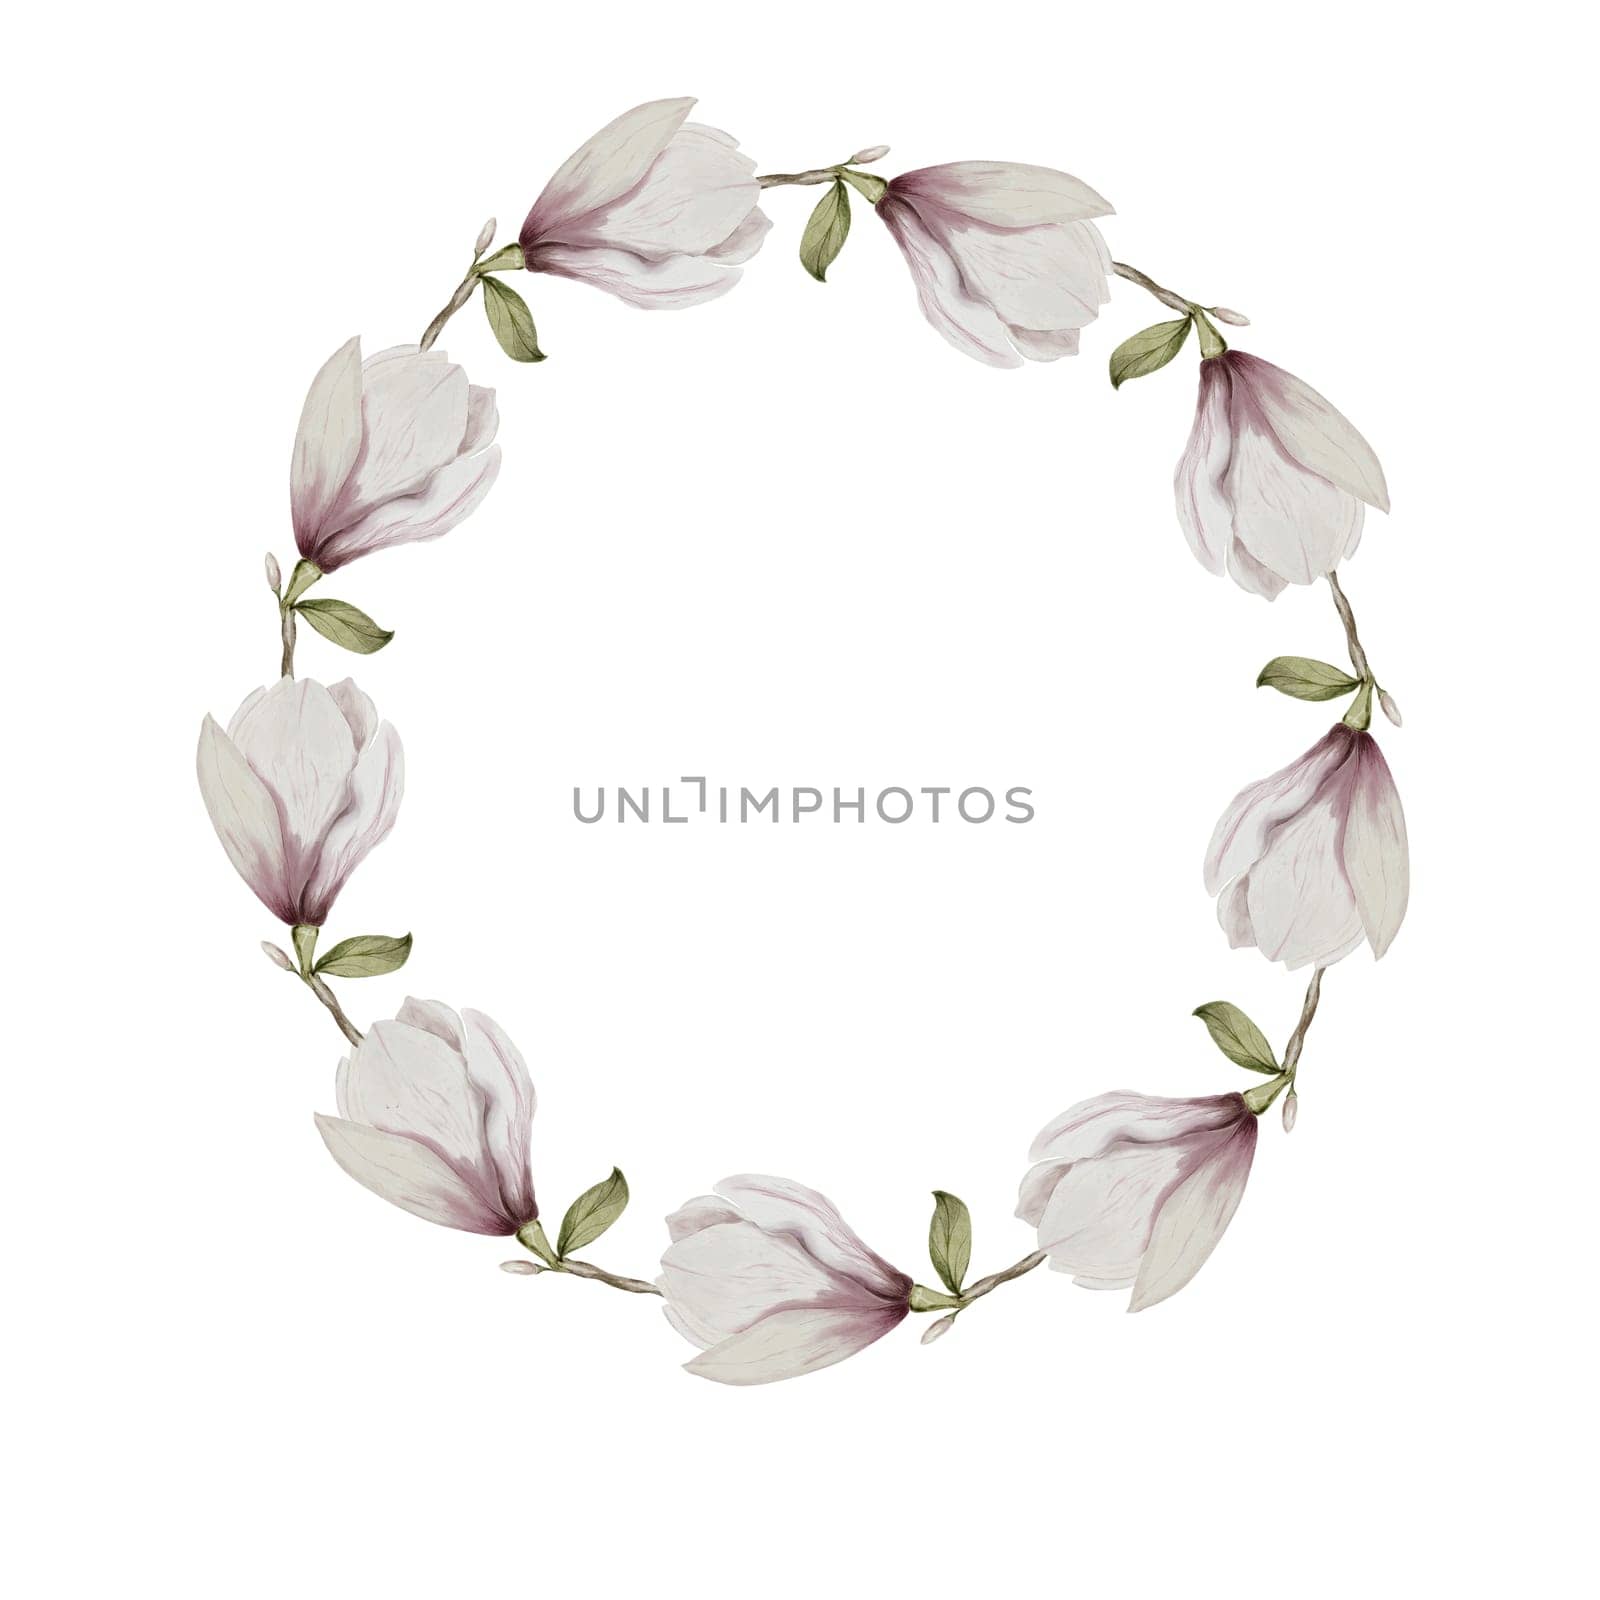 Watercolor round frame and magnolia flowers. Floral wreath with elegant flowers on a white background isolate. For designing cards and invitations for weddings and anniversaries